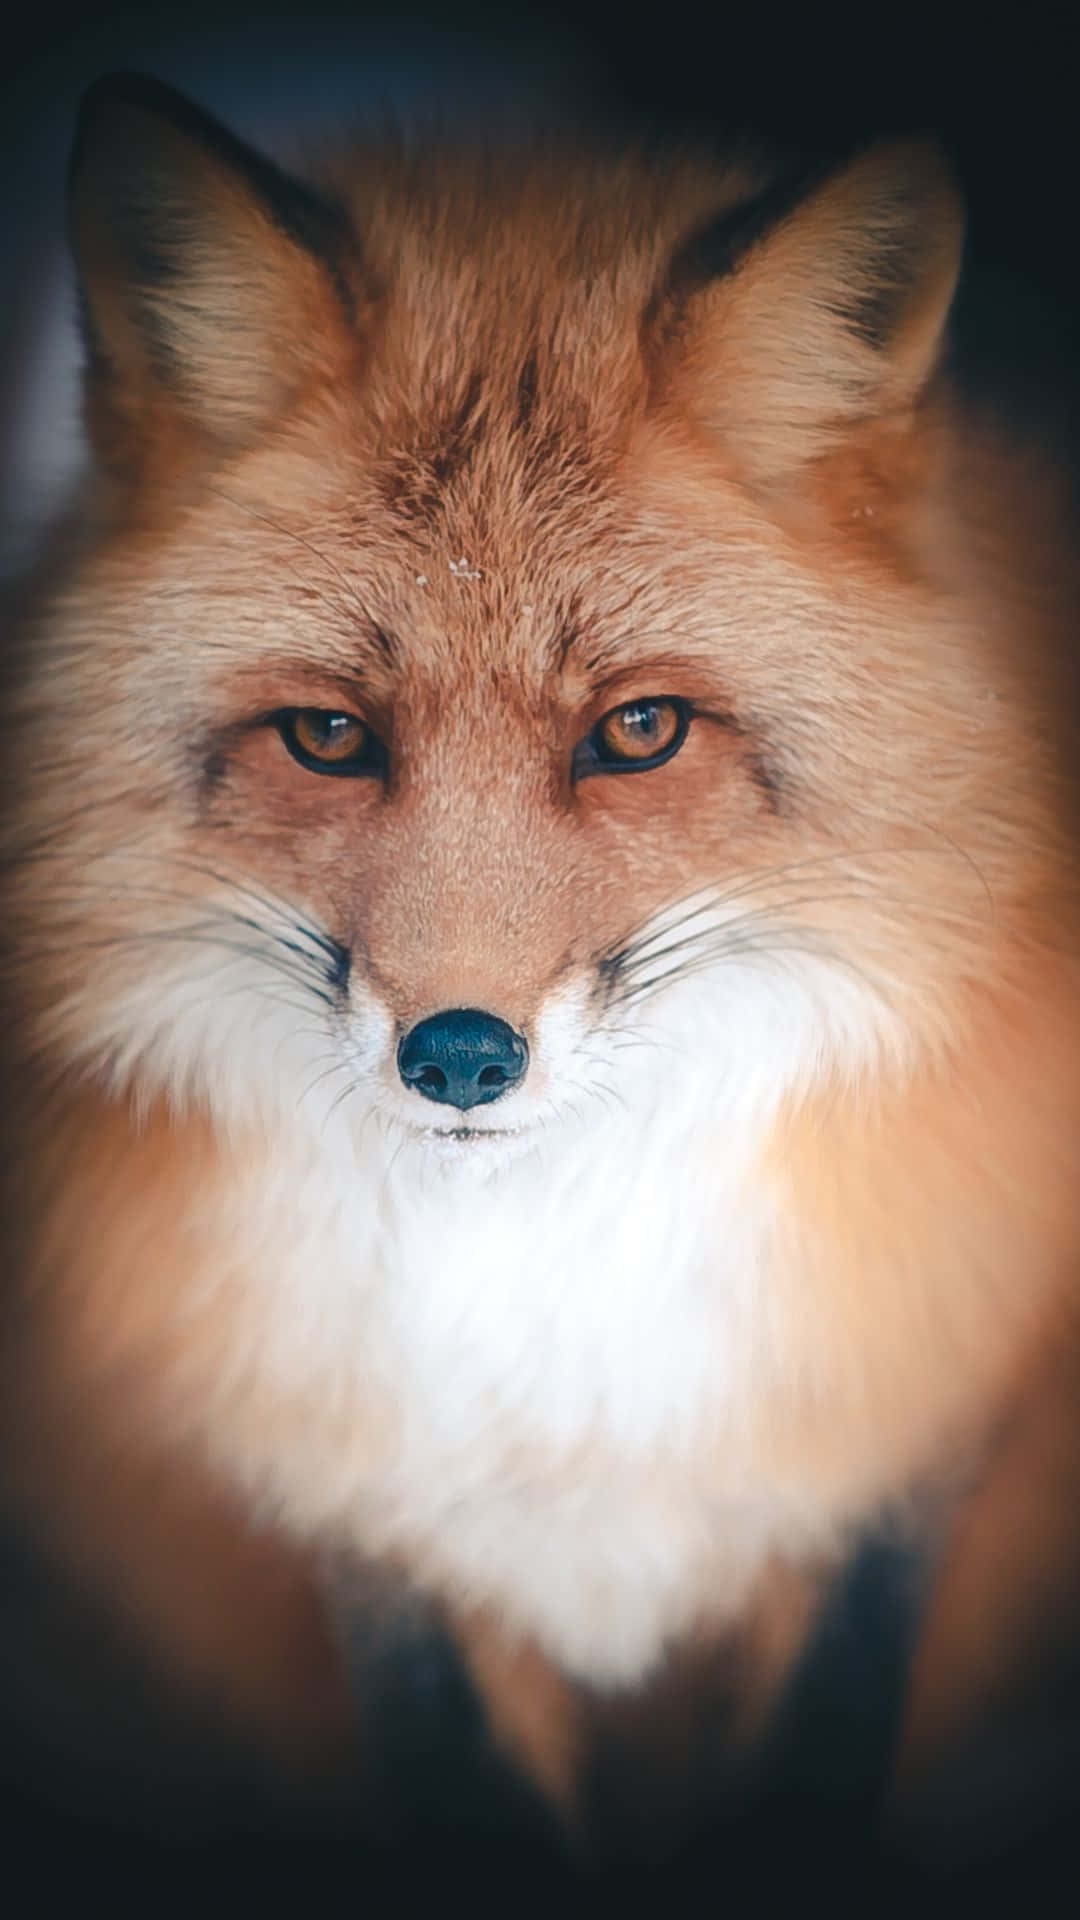 Cool Fox Stares Intently Into The Night. Background